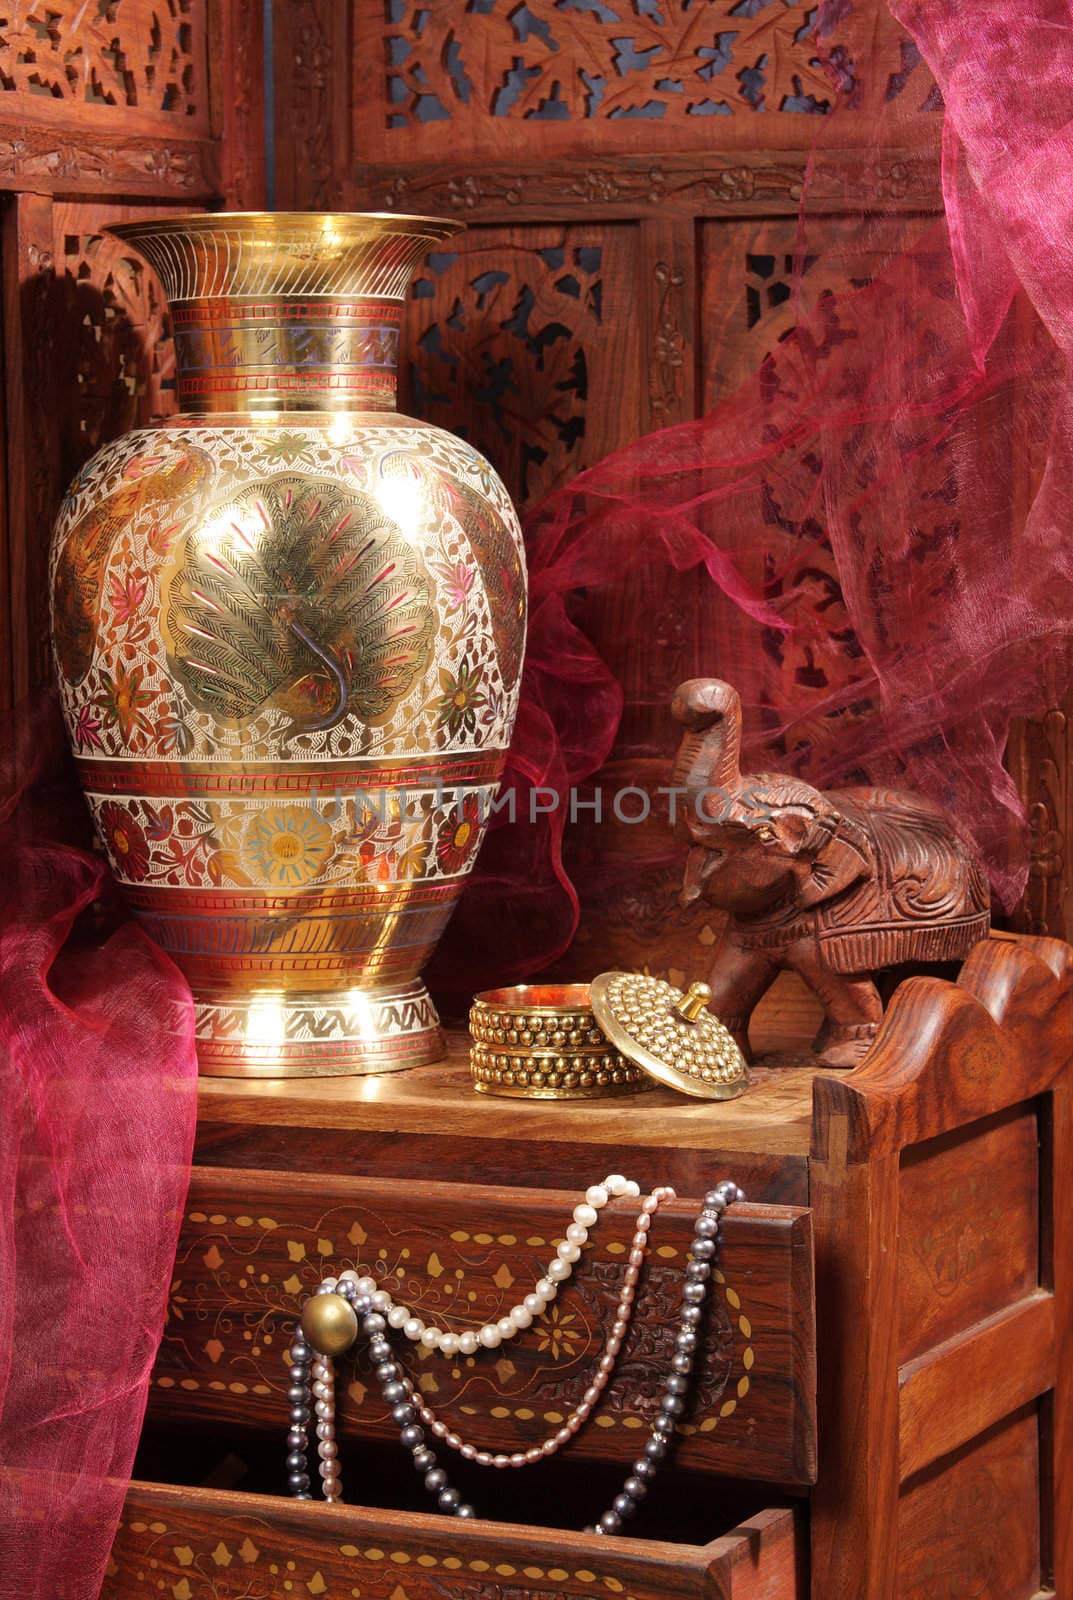 The Indian still-life by sveter